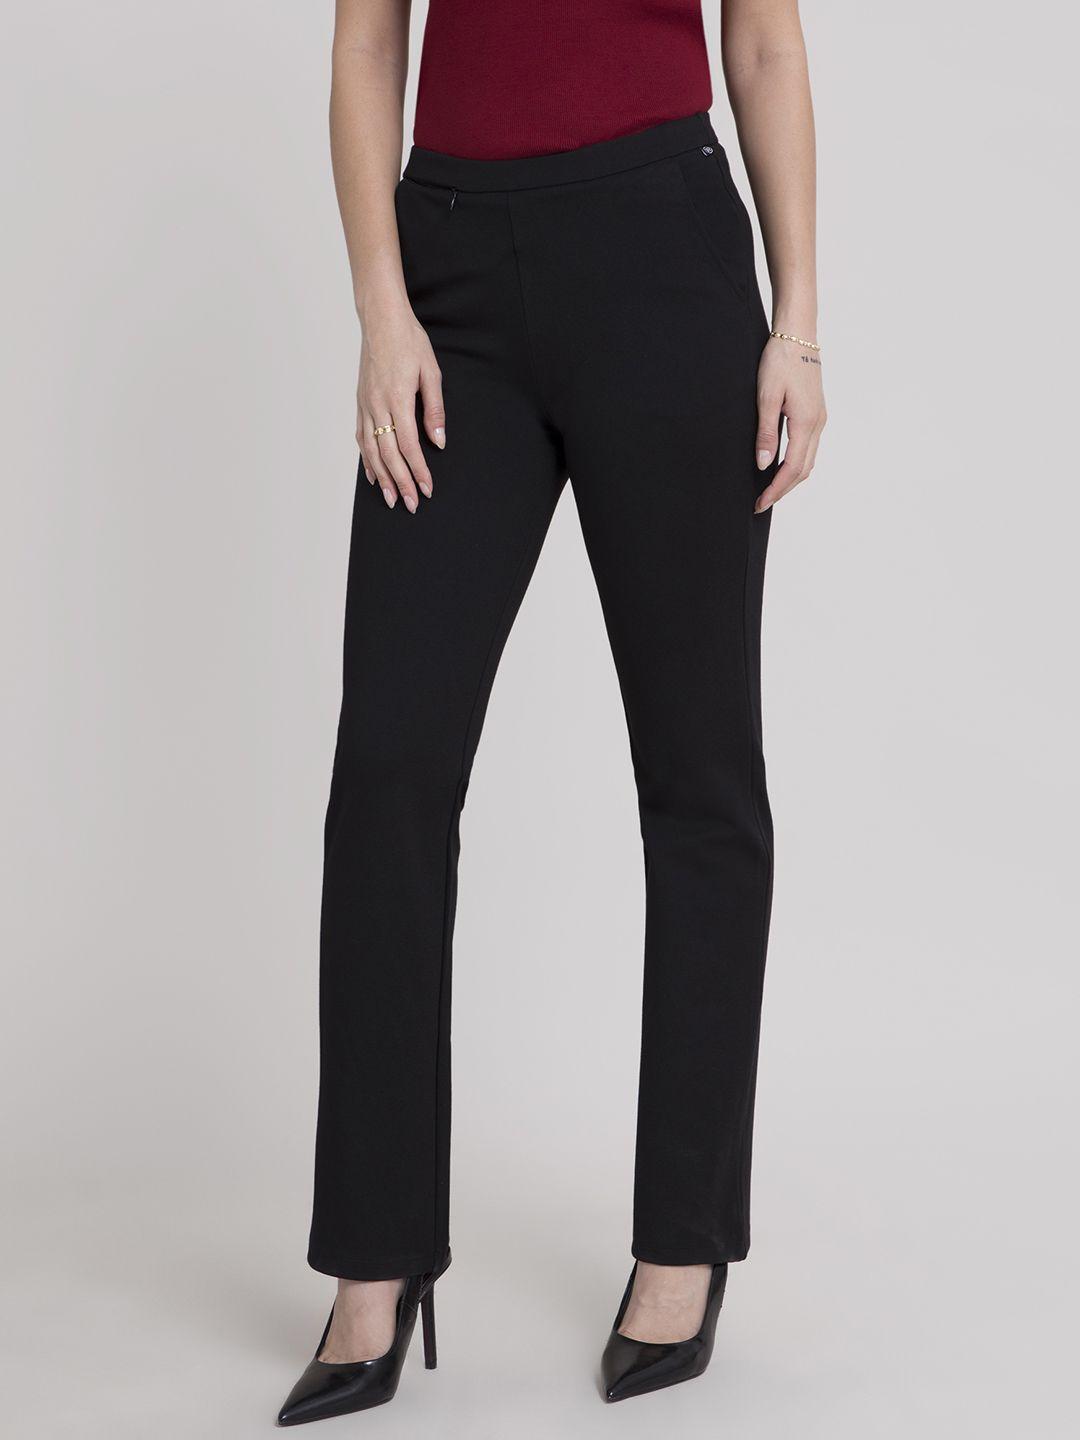 fablestreet livin bootcut formal trousers